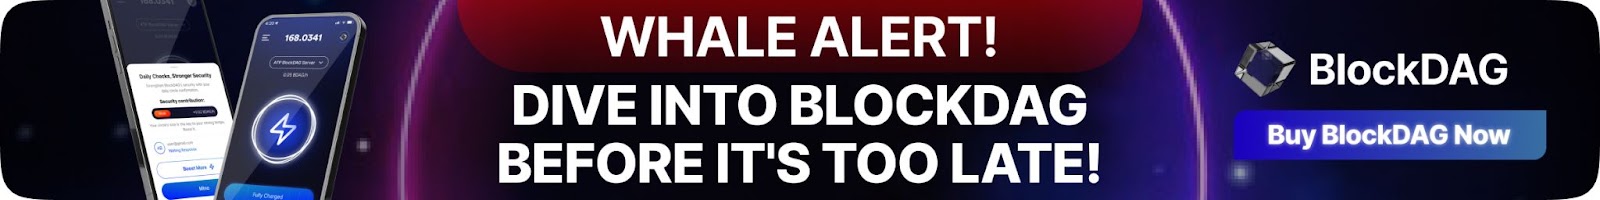 whale alert dive into Blockdag before it's too late